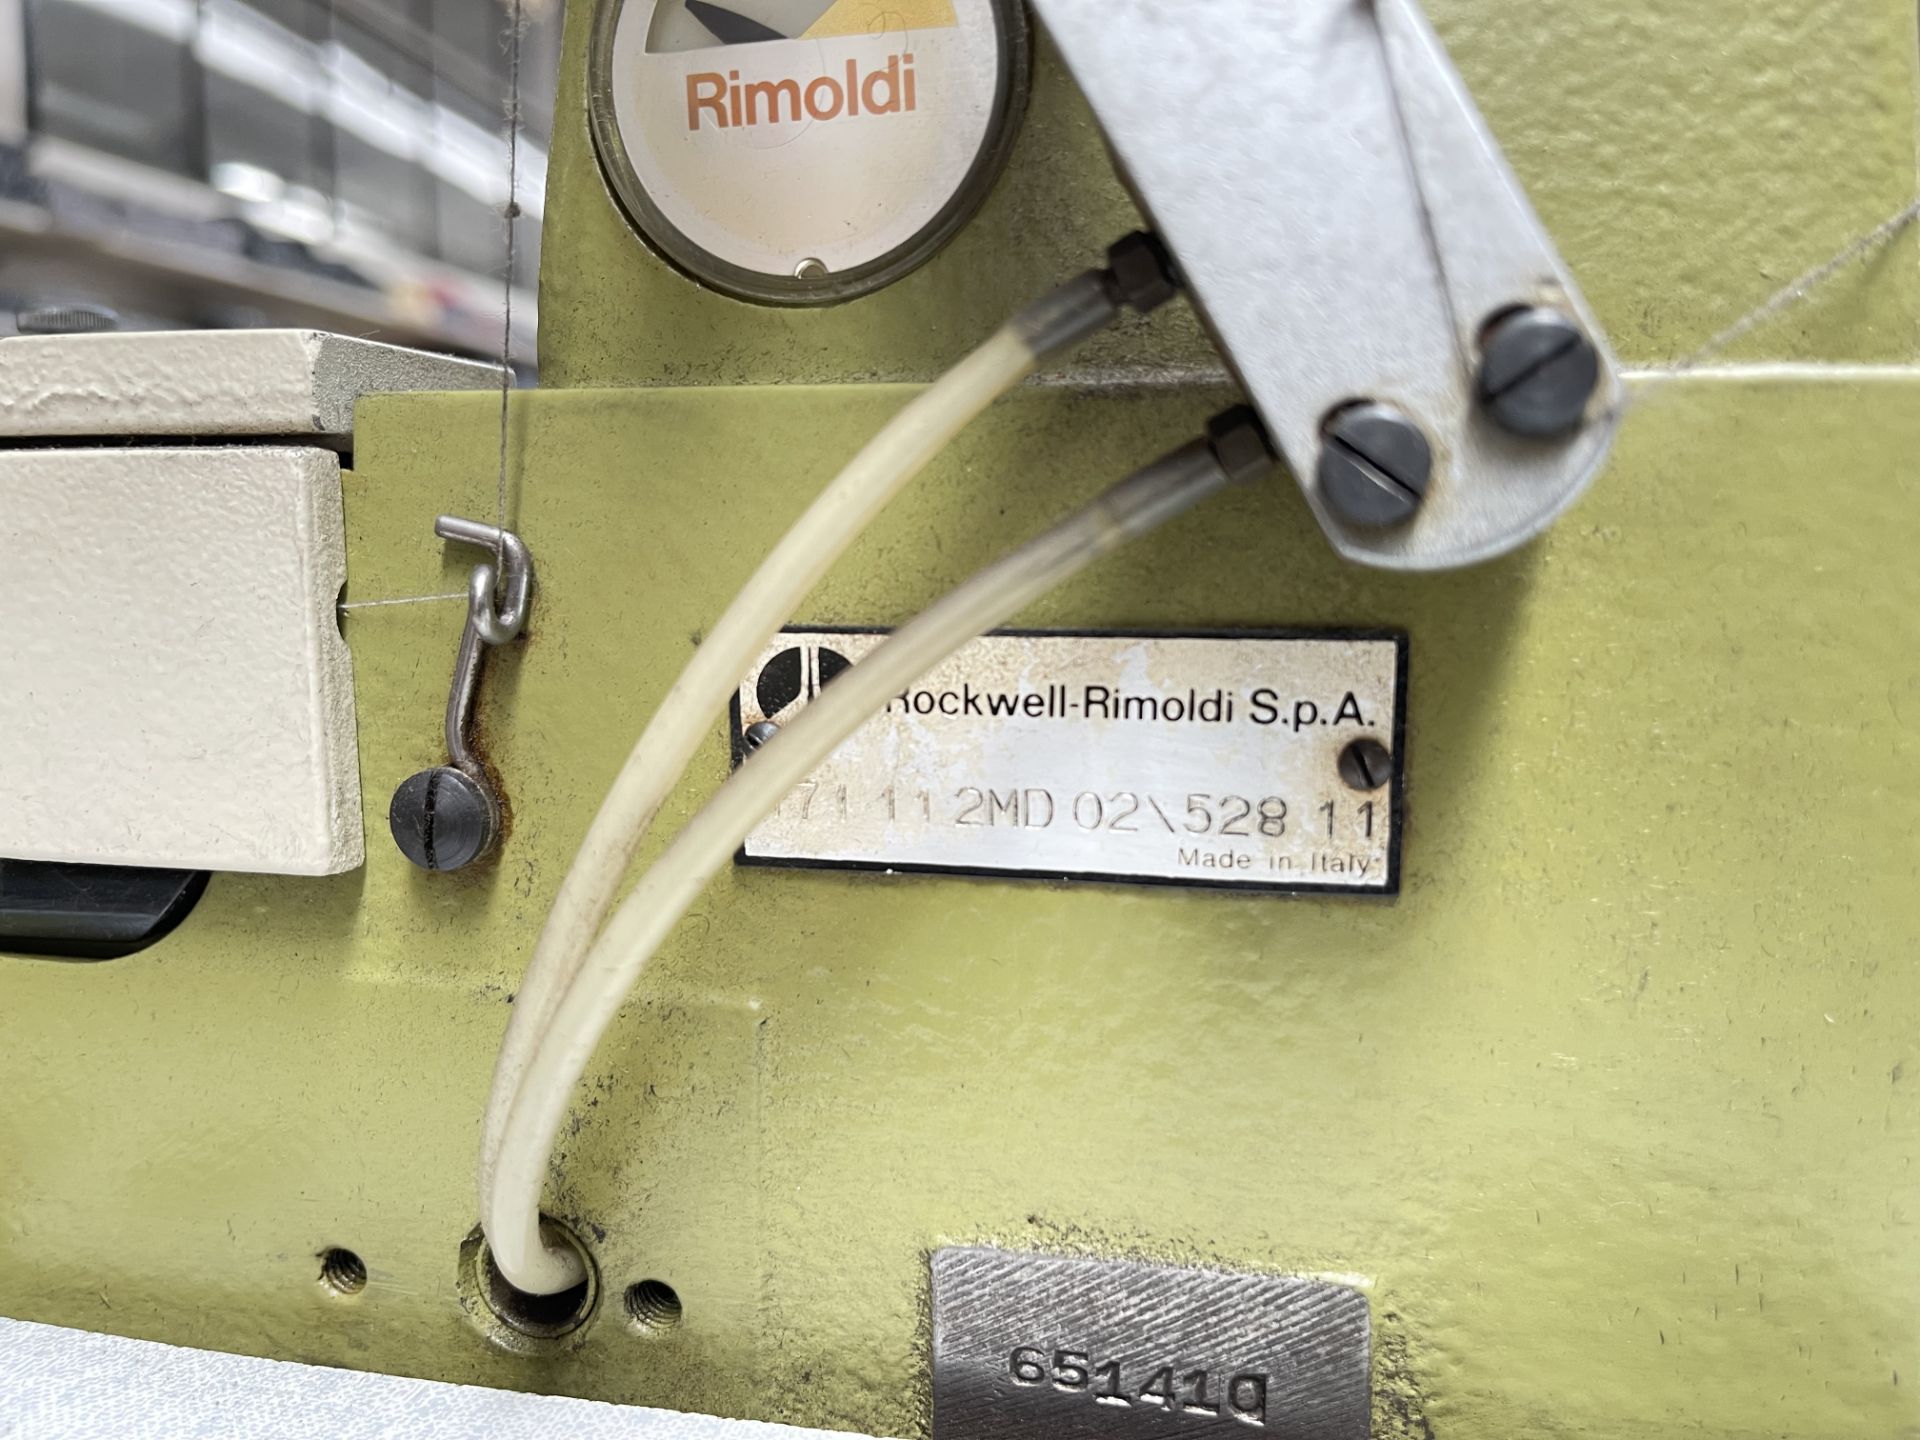 Rimoldi 171 11 2MD 02\528 11 Industrial Sewing machine. S/No 651410 - Image 7 of 8